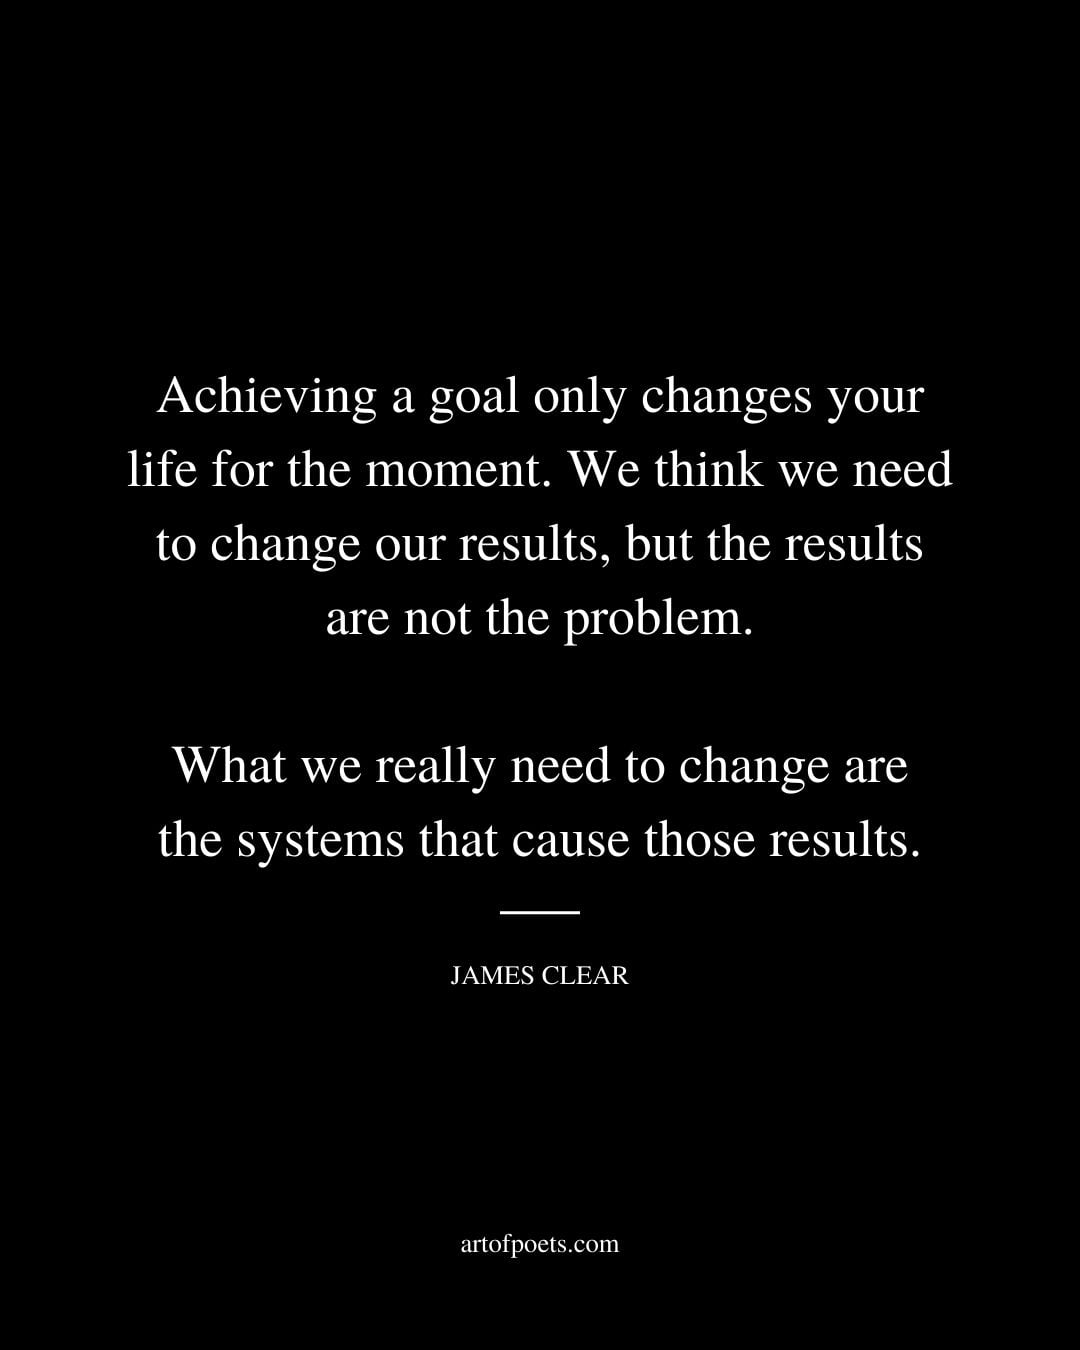 Achieving a goal only changes your life for the moment